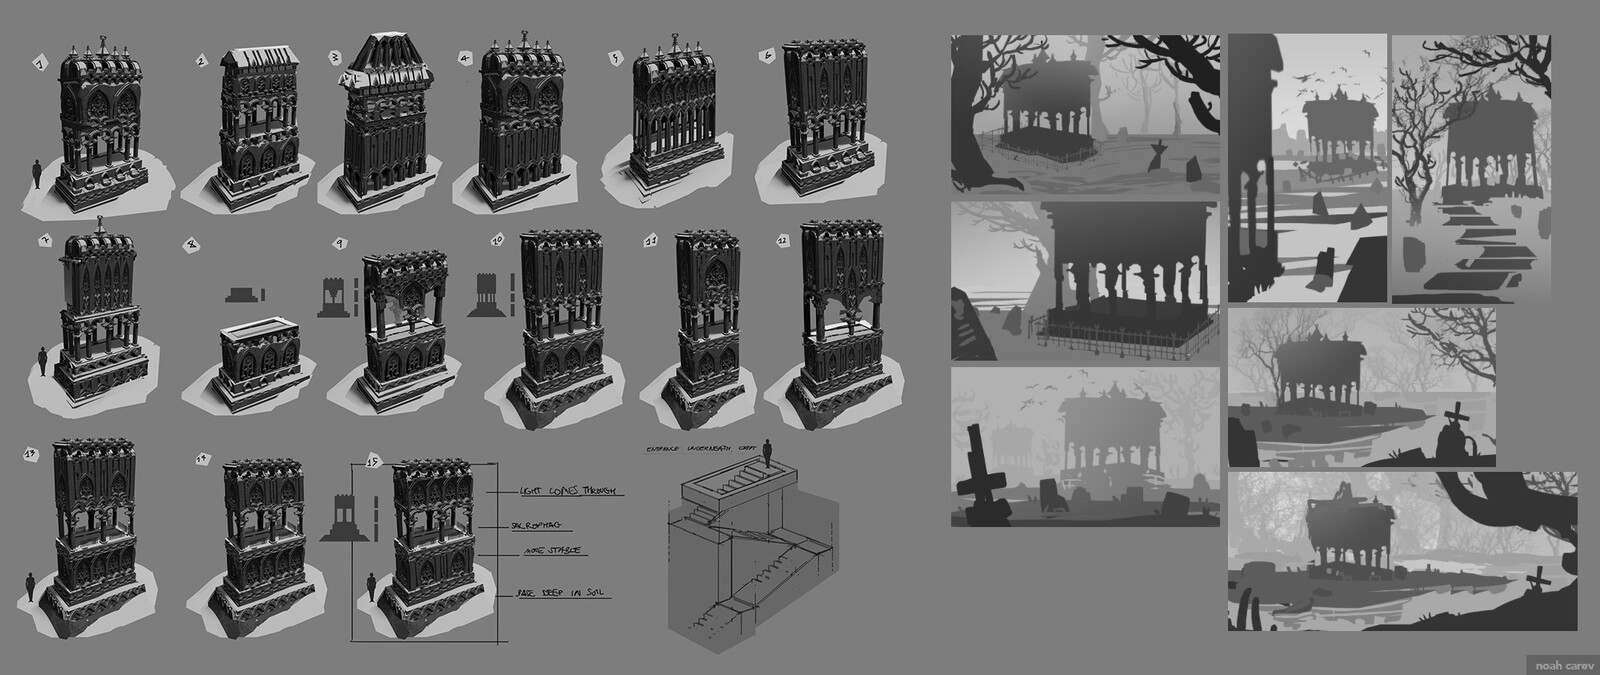 More design explorations, until the final shape was born. On the right side composition thumbnails.